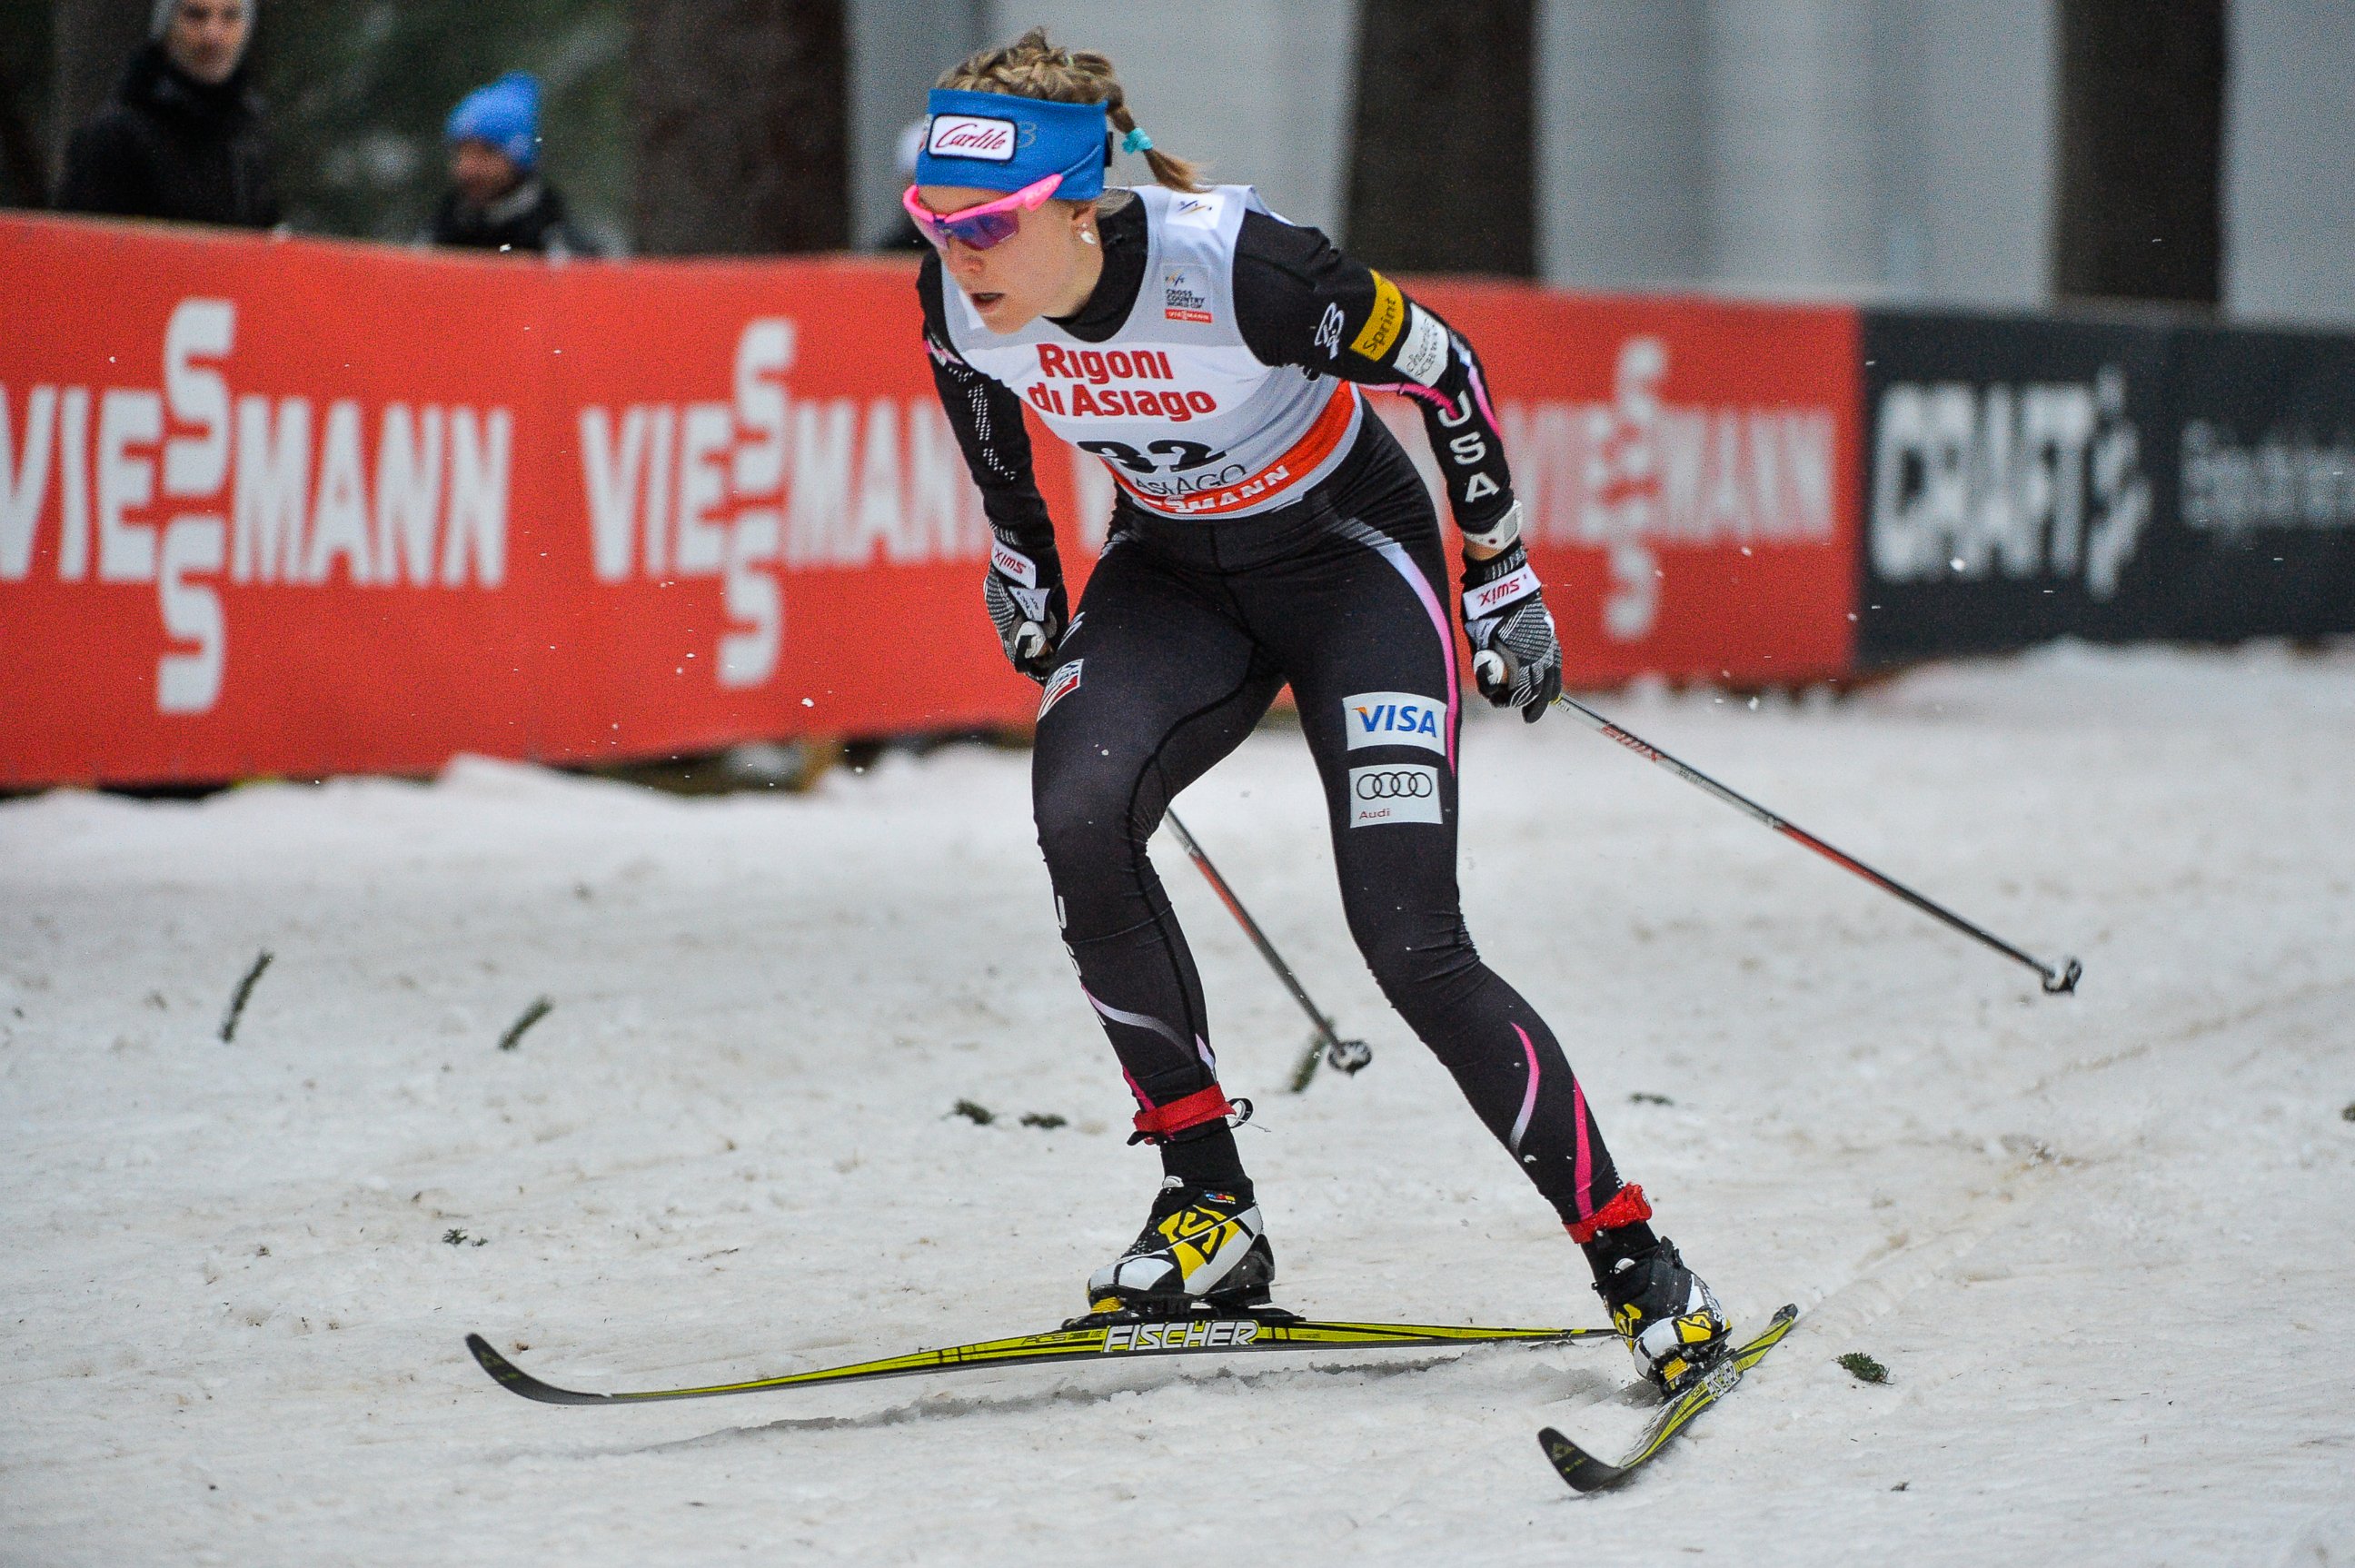 PHOTO: Sadie Bjornsen competes in the Women's 1,25 km Classic Sprint event during the FIS Cross Country skiing World Cup at " Millepini " stadium in Asiago, northern Italy, Dec. 21, 2013.